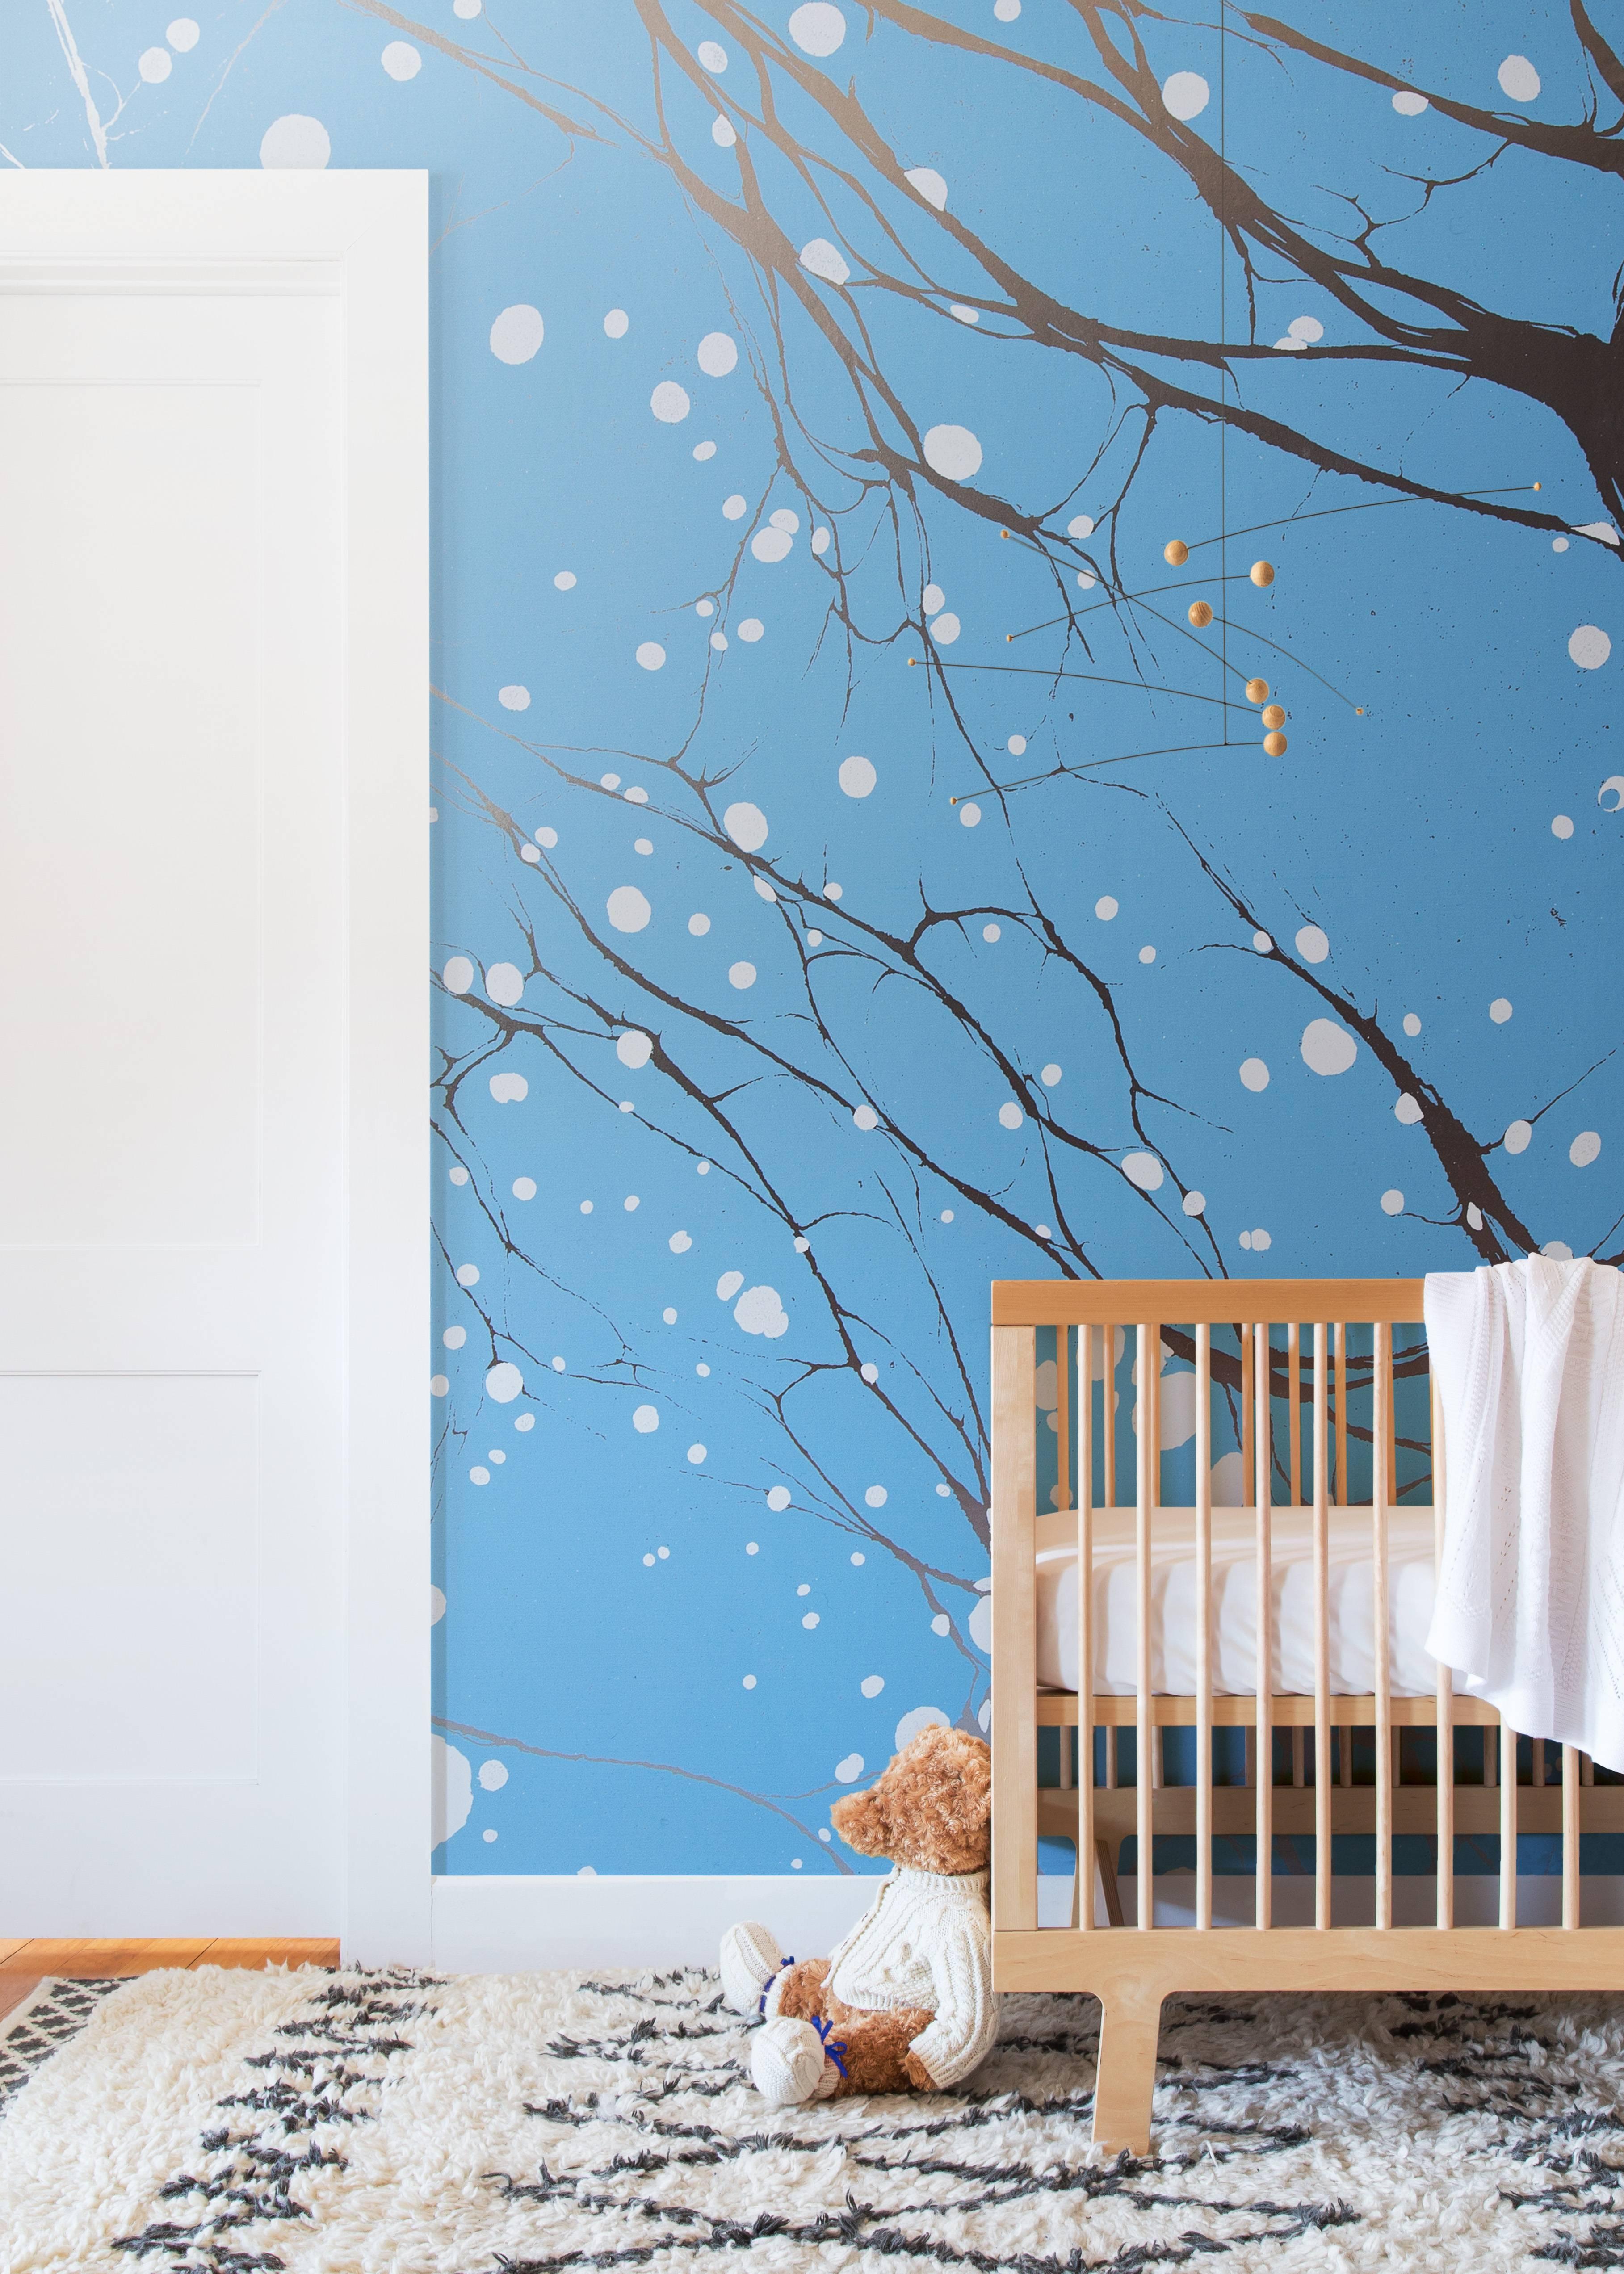 All of our wallpapers are priced by the square foot and are non-repeating custom murals. As a result, each order is laid out and printed to fit the exact dimensions of your wall. The Willow collection is printed on a commercial grade type II silver